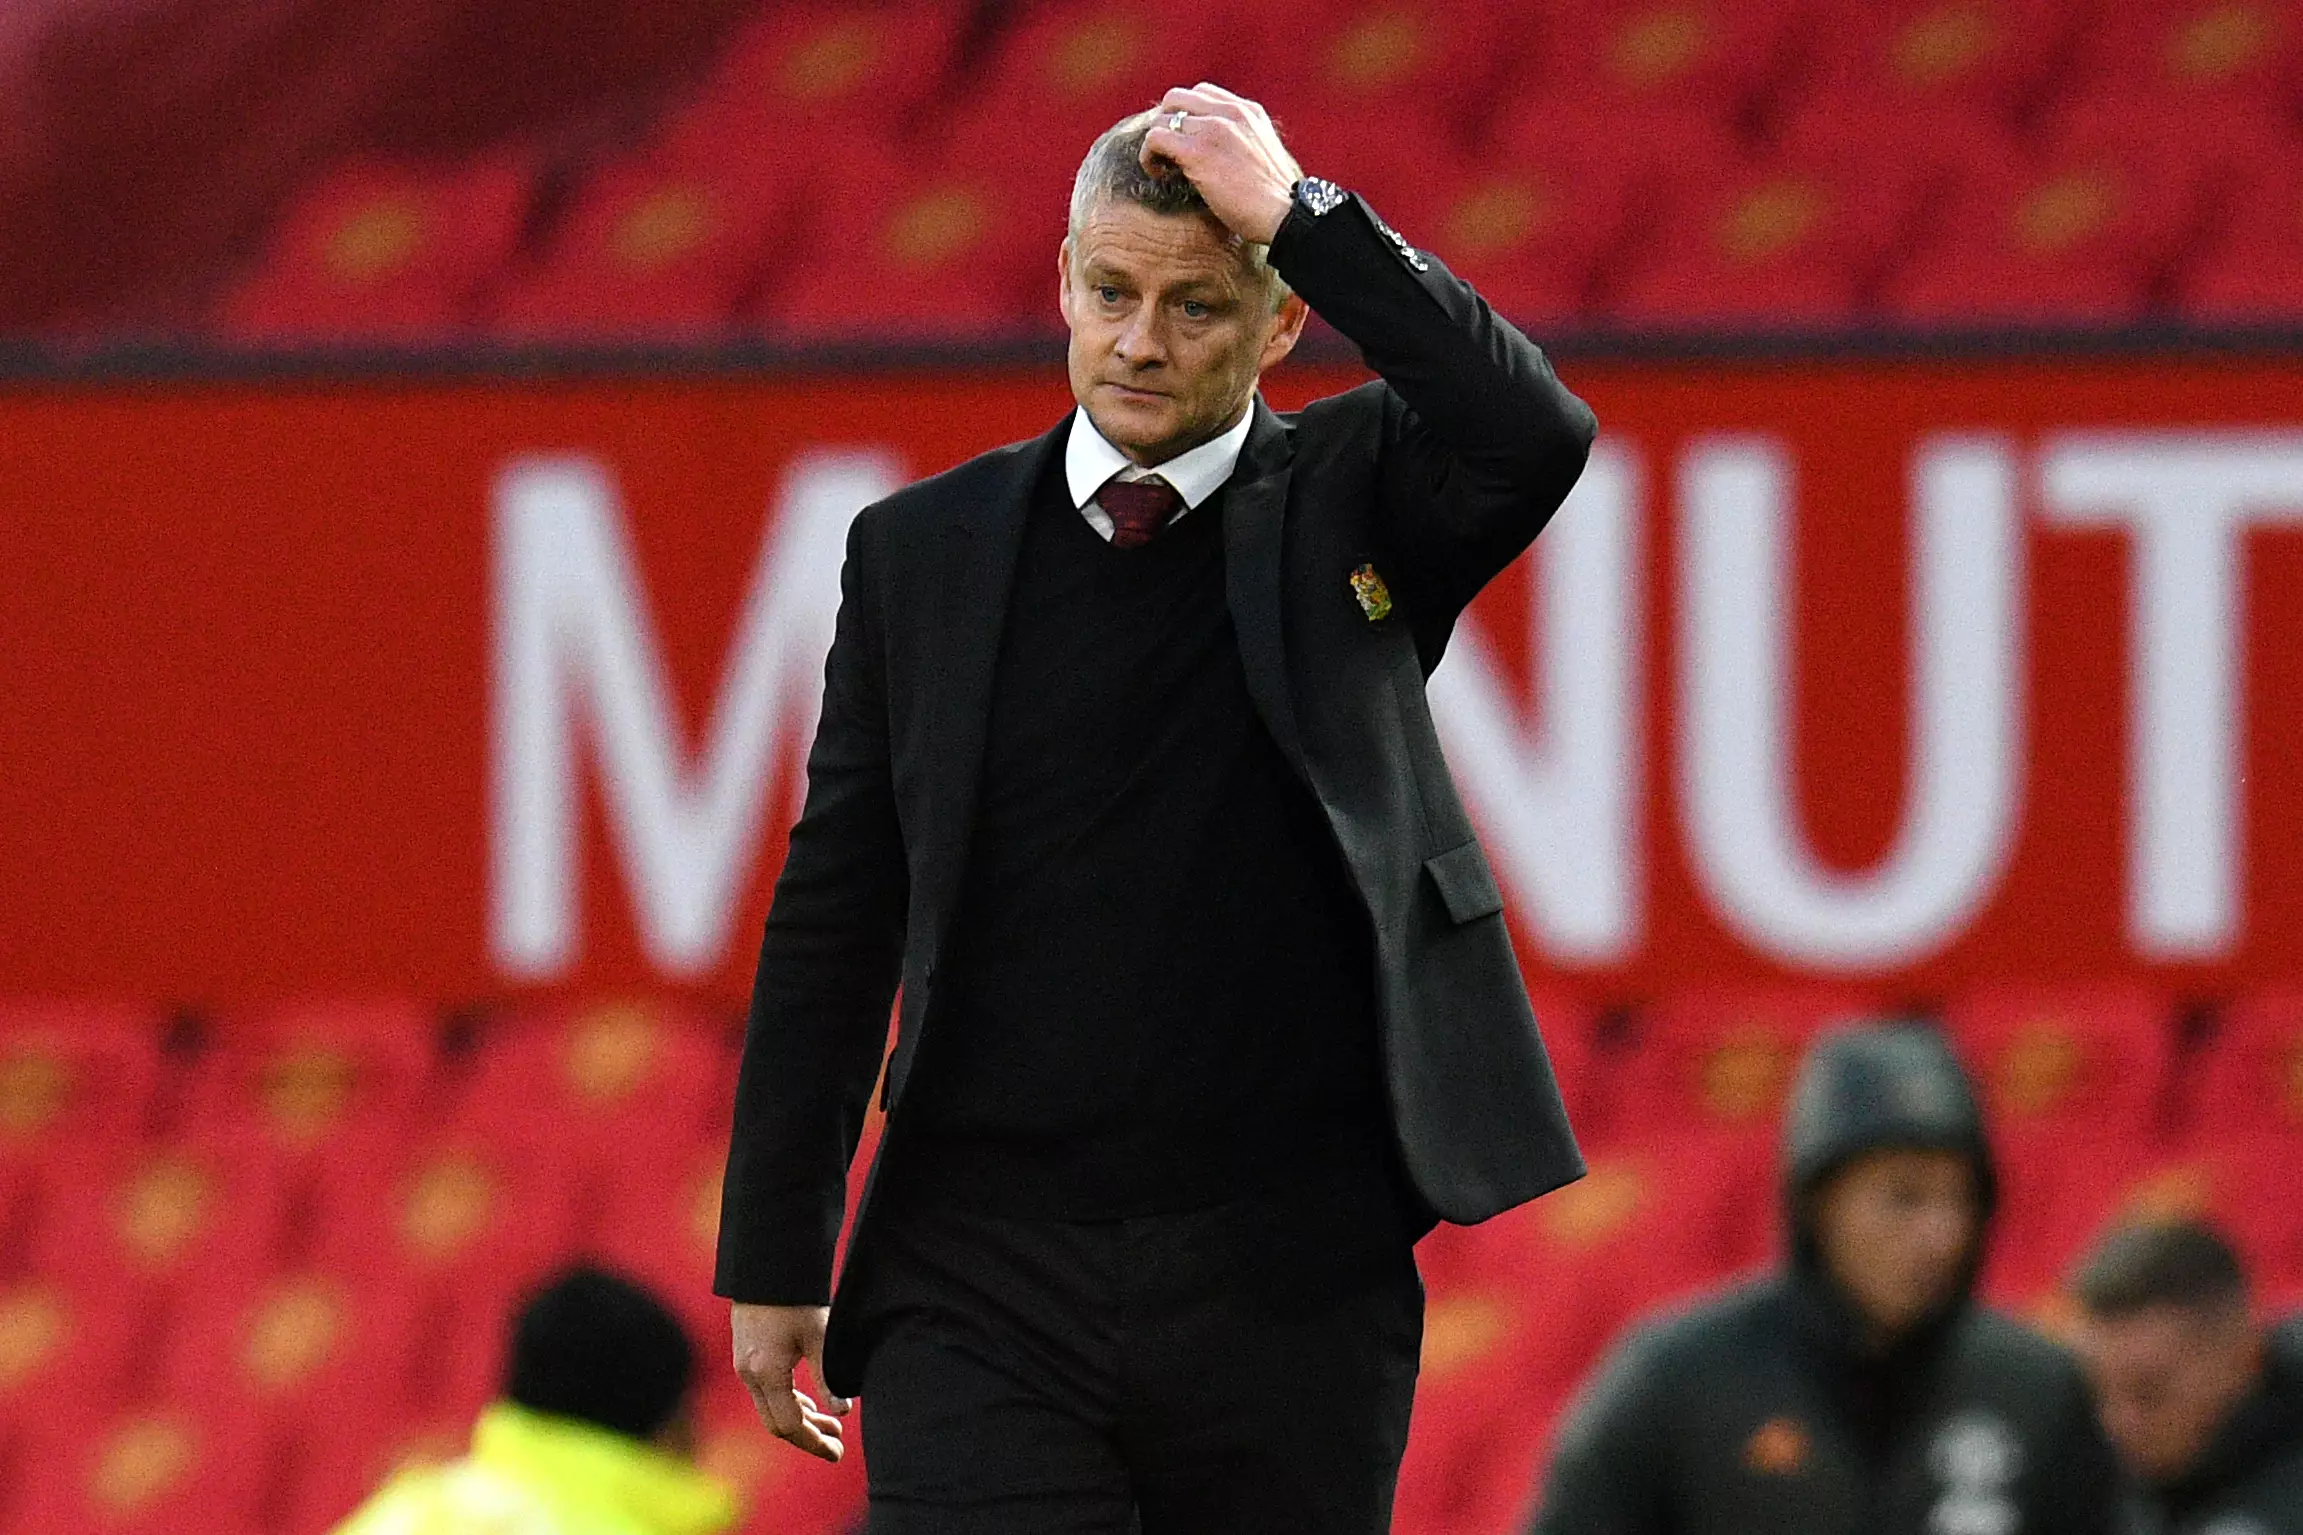 Solskjaer during the loss to Spurs. Image: PA Images